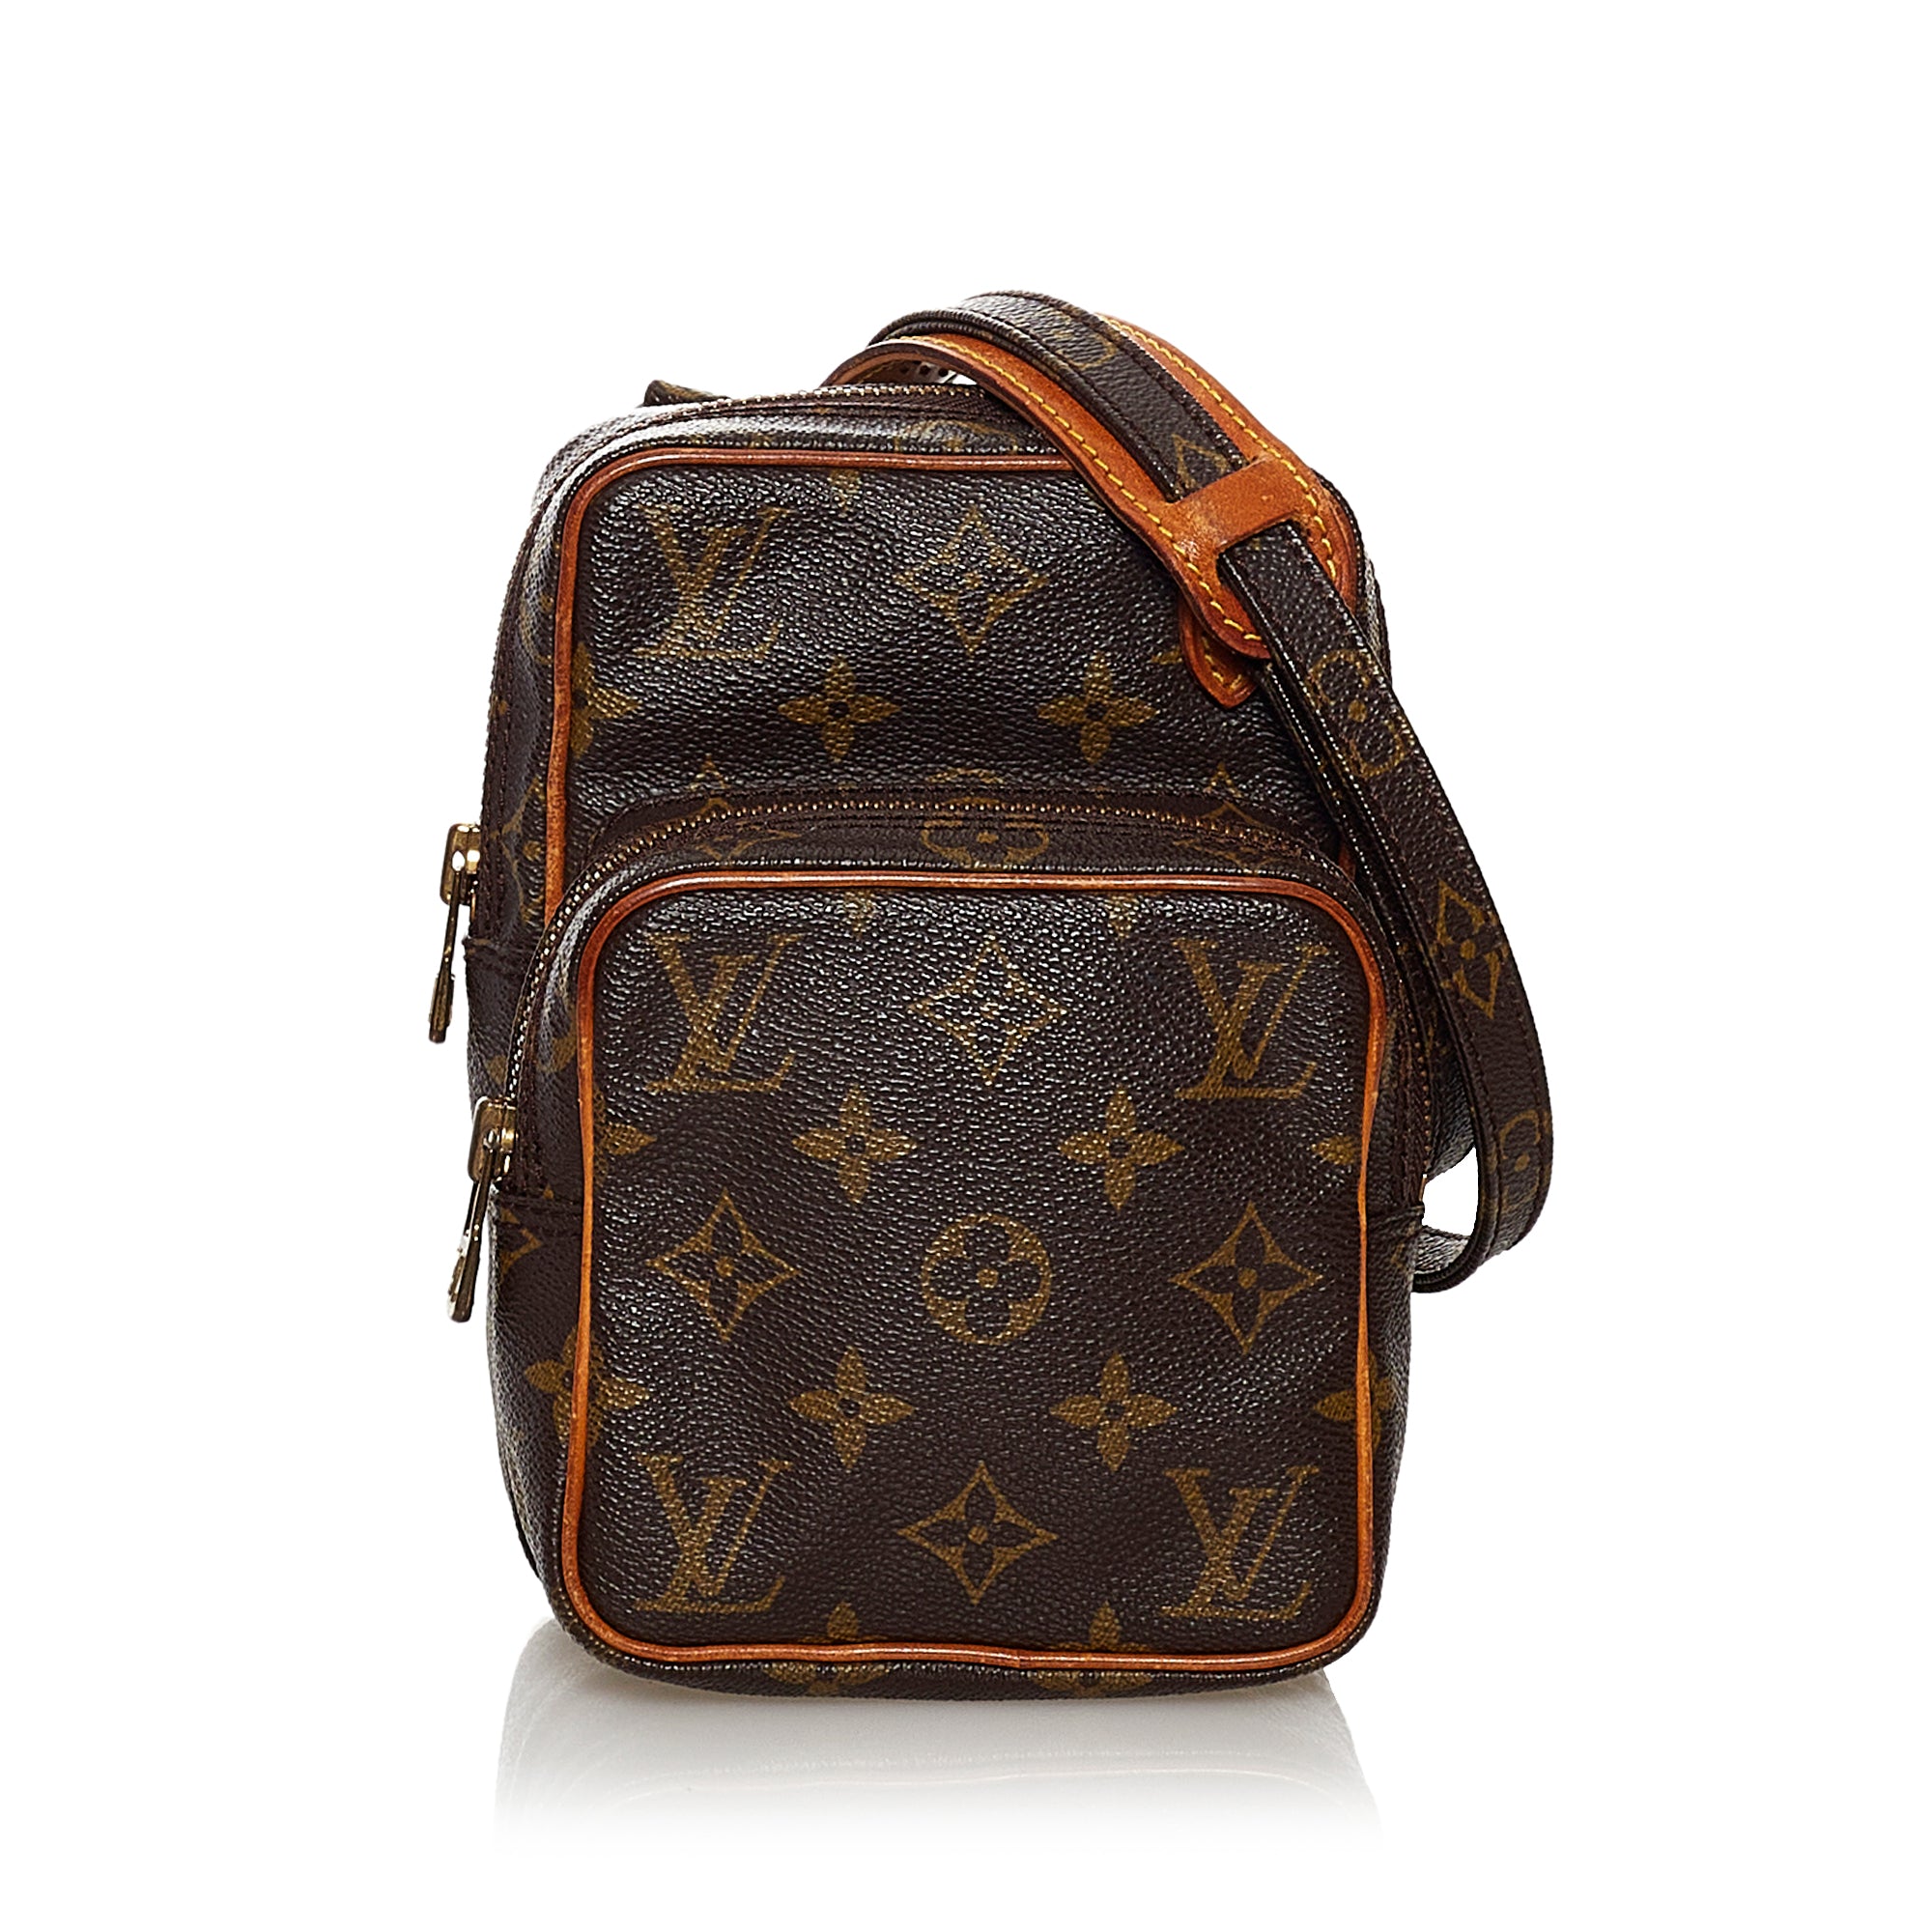 louis vuitton piano shopping bag in ebene damier canvas and brown leather